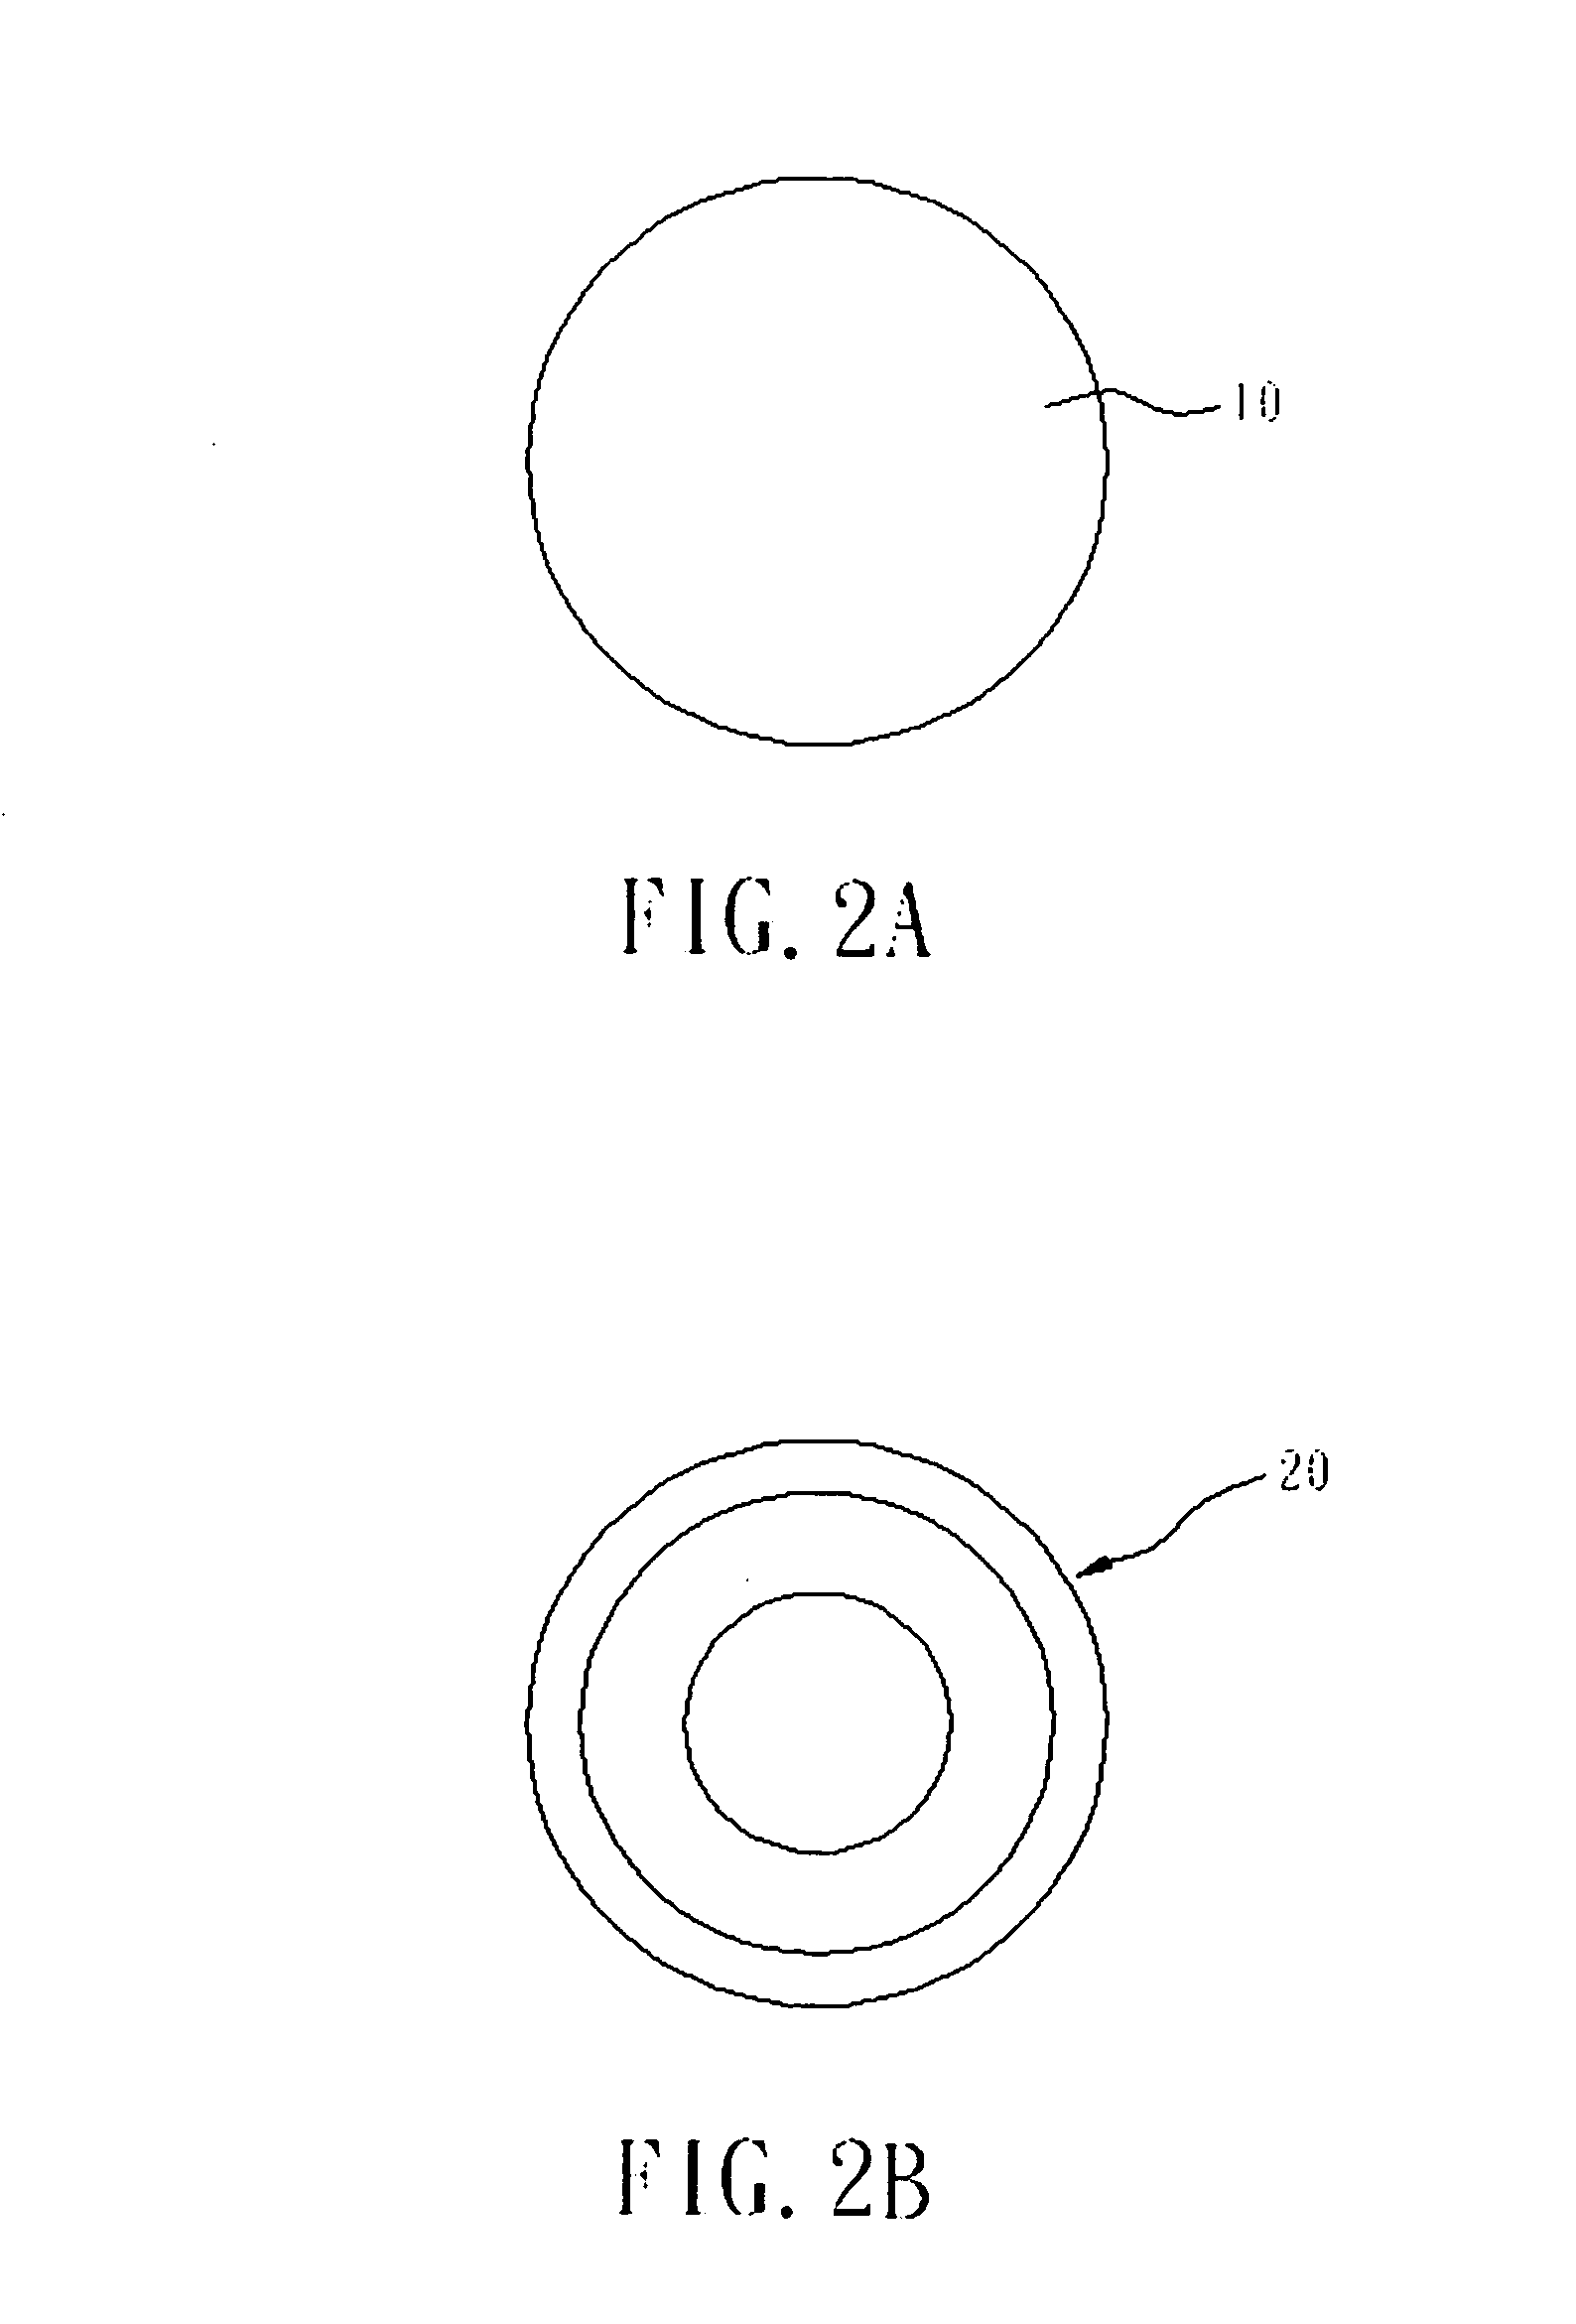 Product for controlling dissolving rate of orthopedic implant material and process of producing the same